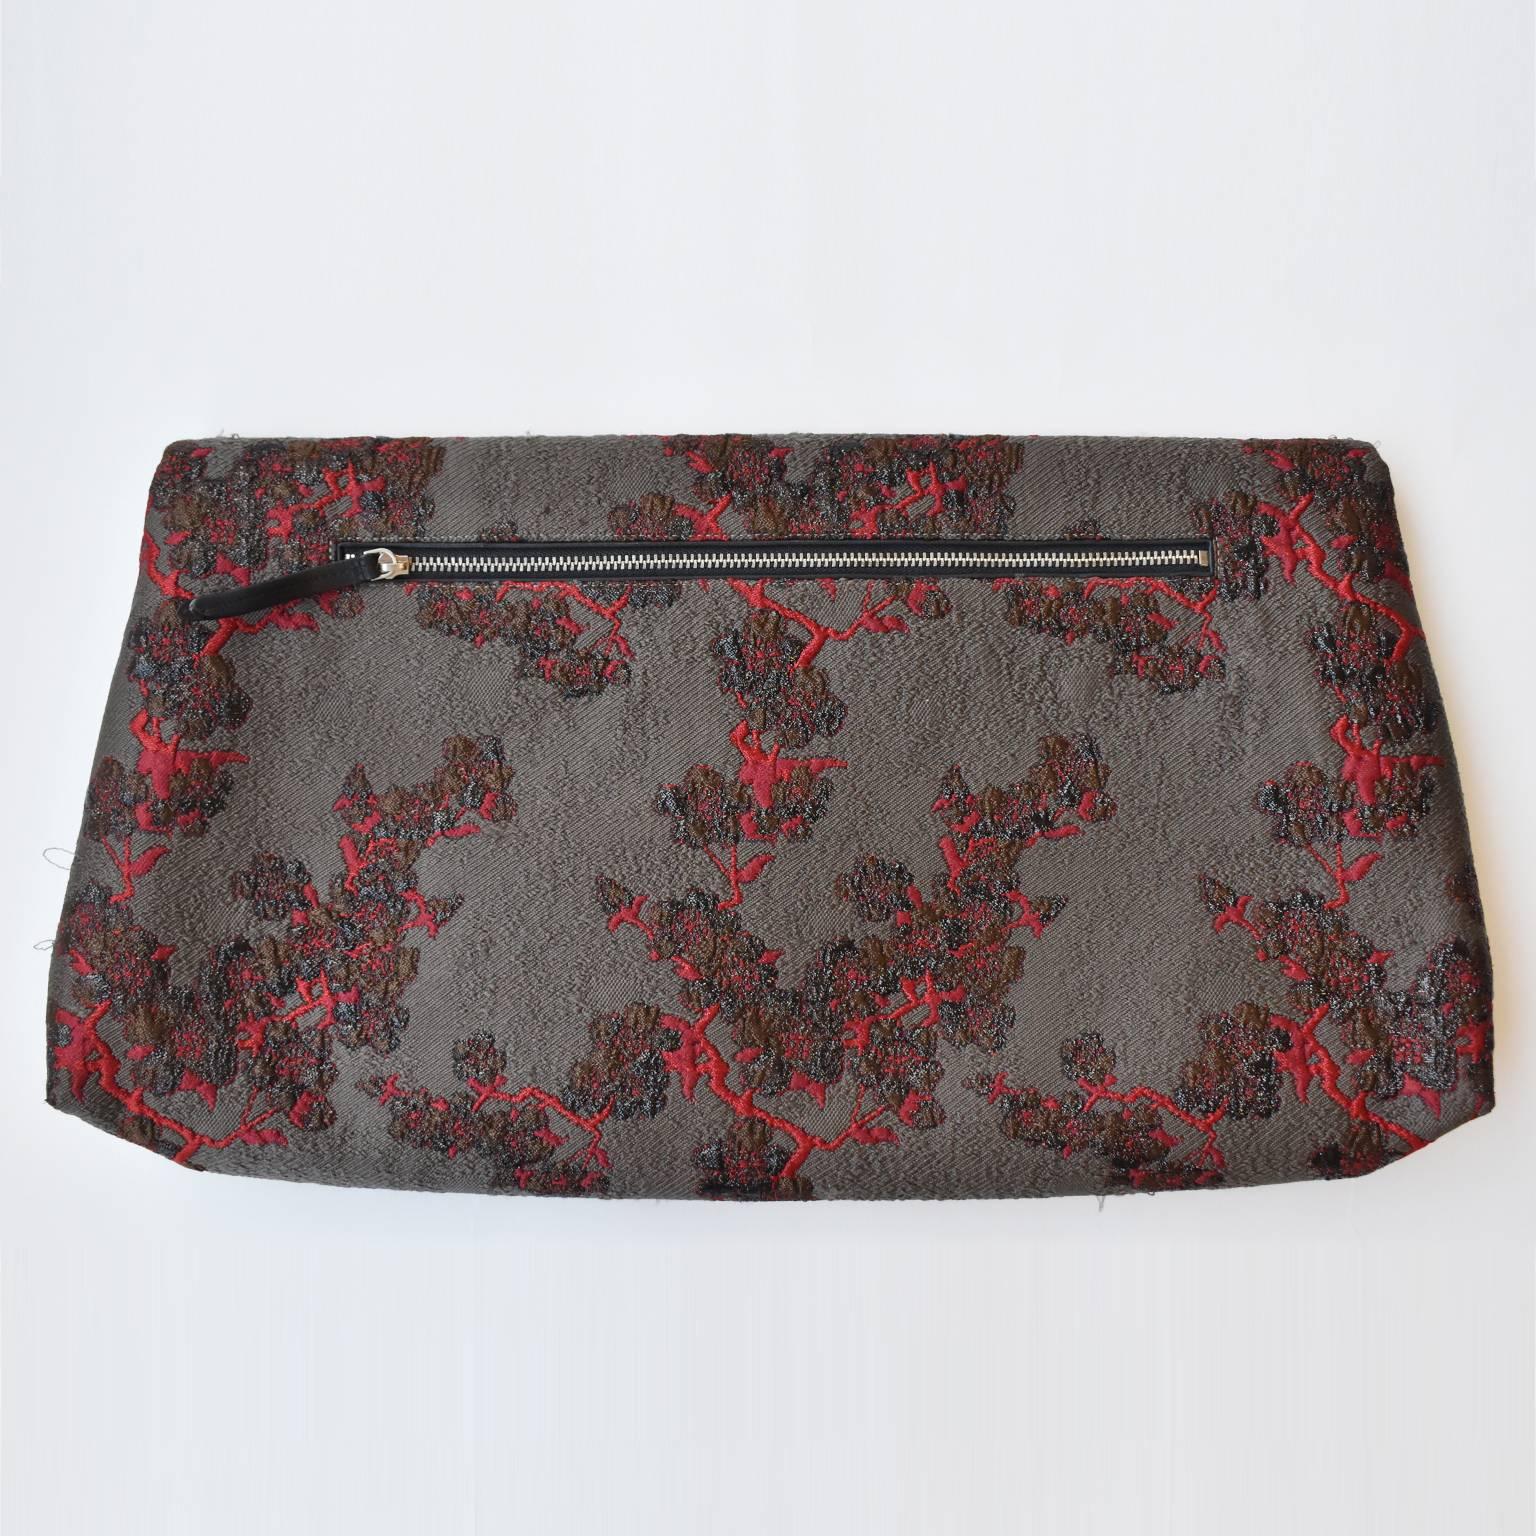 A  grey and burgundy blossom jacquard envelope clutch by Dries Van Noten. It features a leather lining, a back zip pocket, and a magnetic fastening. It comes with dustbag. It has a few pulls (see pictures), otherwise in excellent condition.